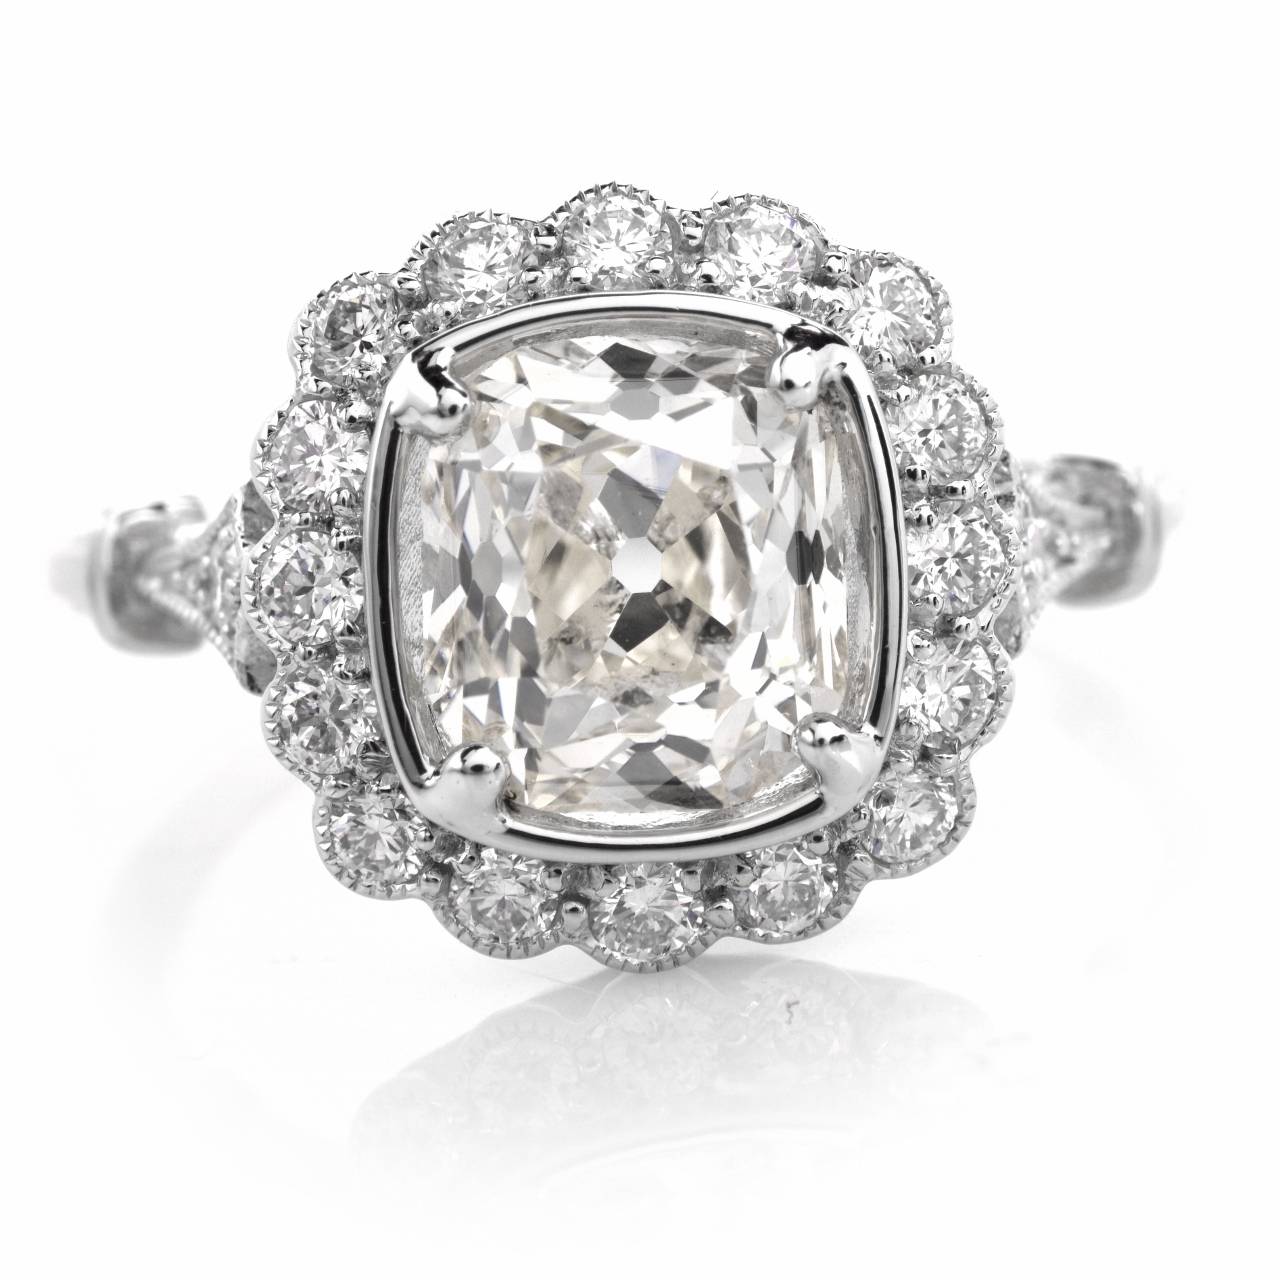 This vintage engagement ring of immaculate design and alluring monochromatic aesthetic is crafted in solid platinum and weighs approx. 5.2 grams. Incorporating an impressive rounded quadrangular plaque, this exquisite engagement ring exposes at the